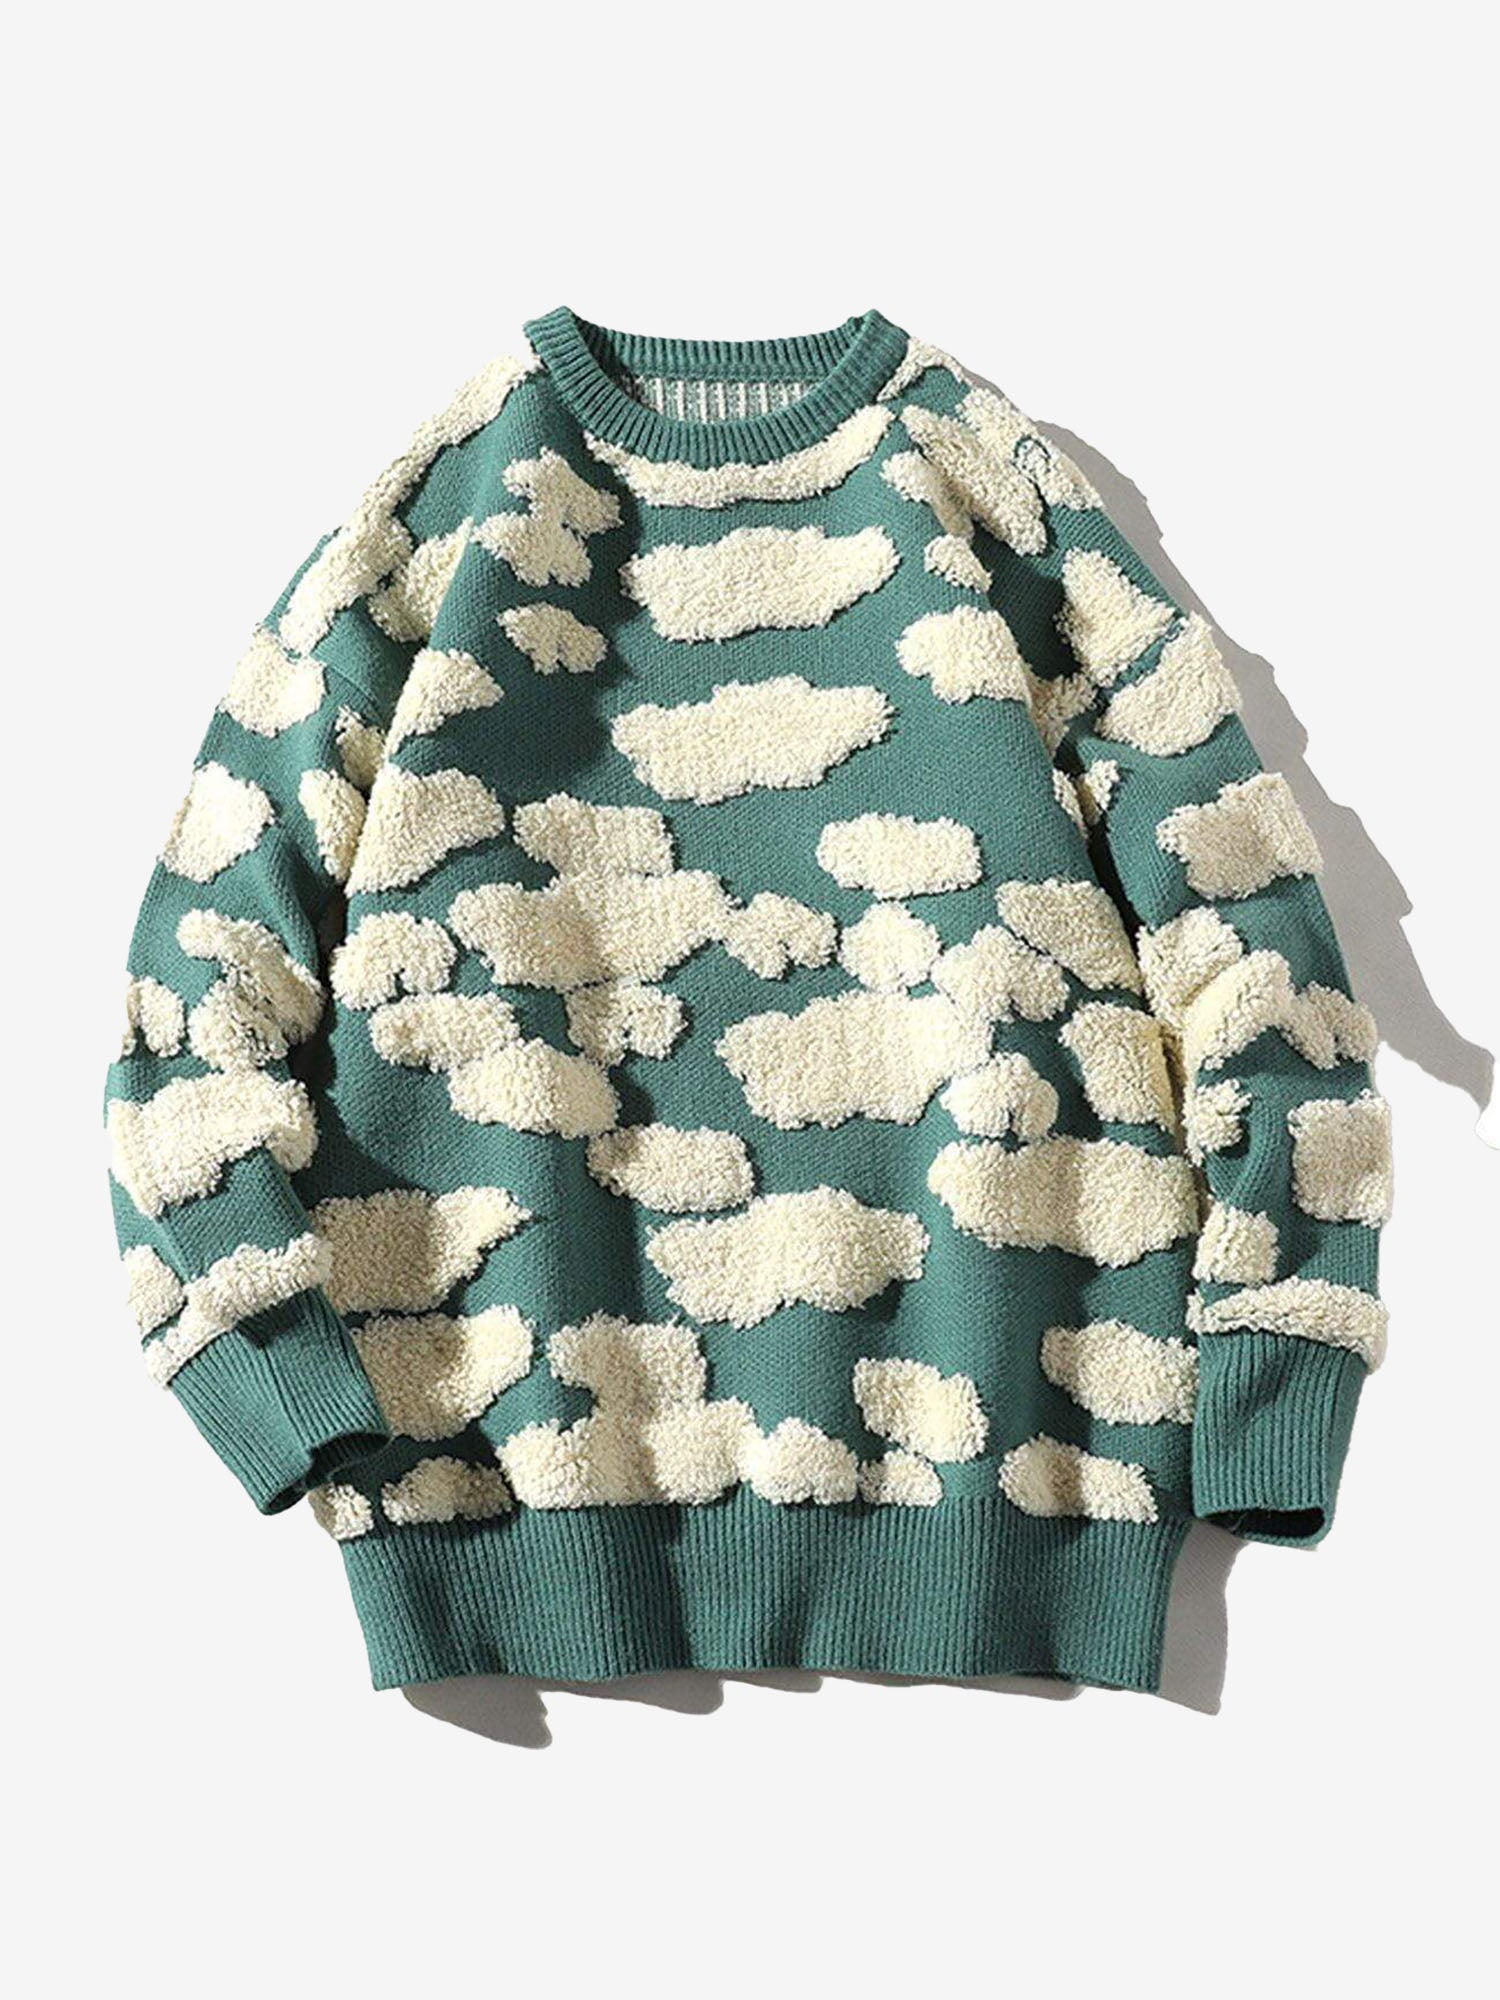 JUSTNOTAG Cloud Three-dimensional Relief Pattern Sweater